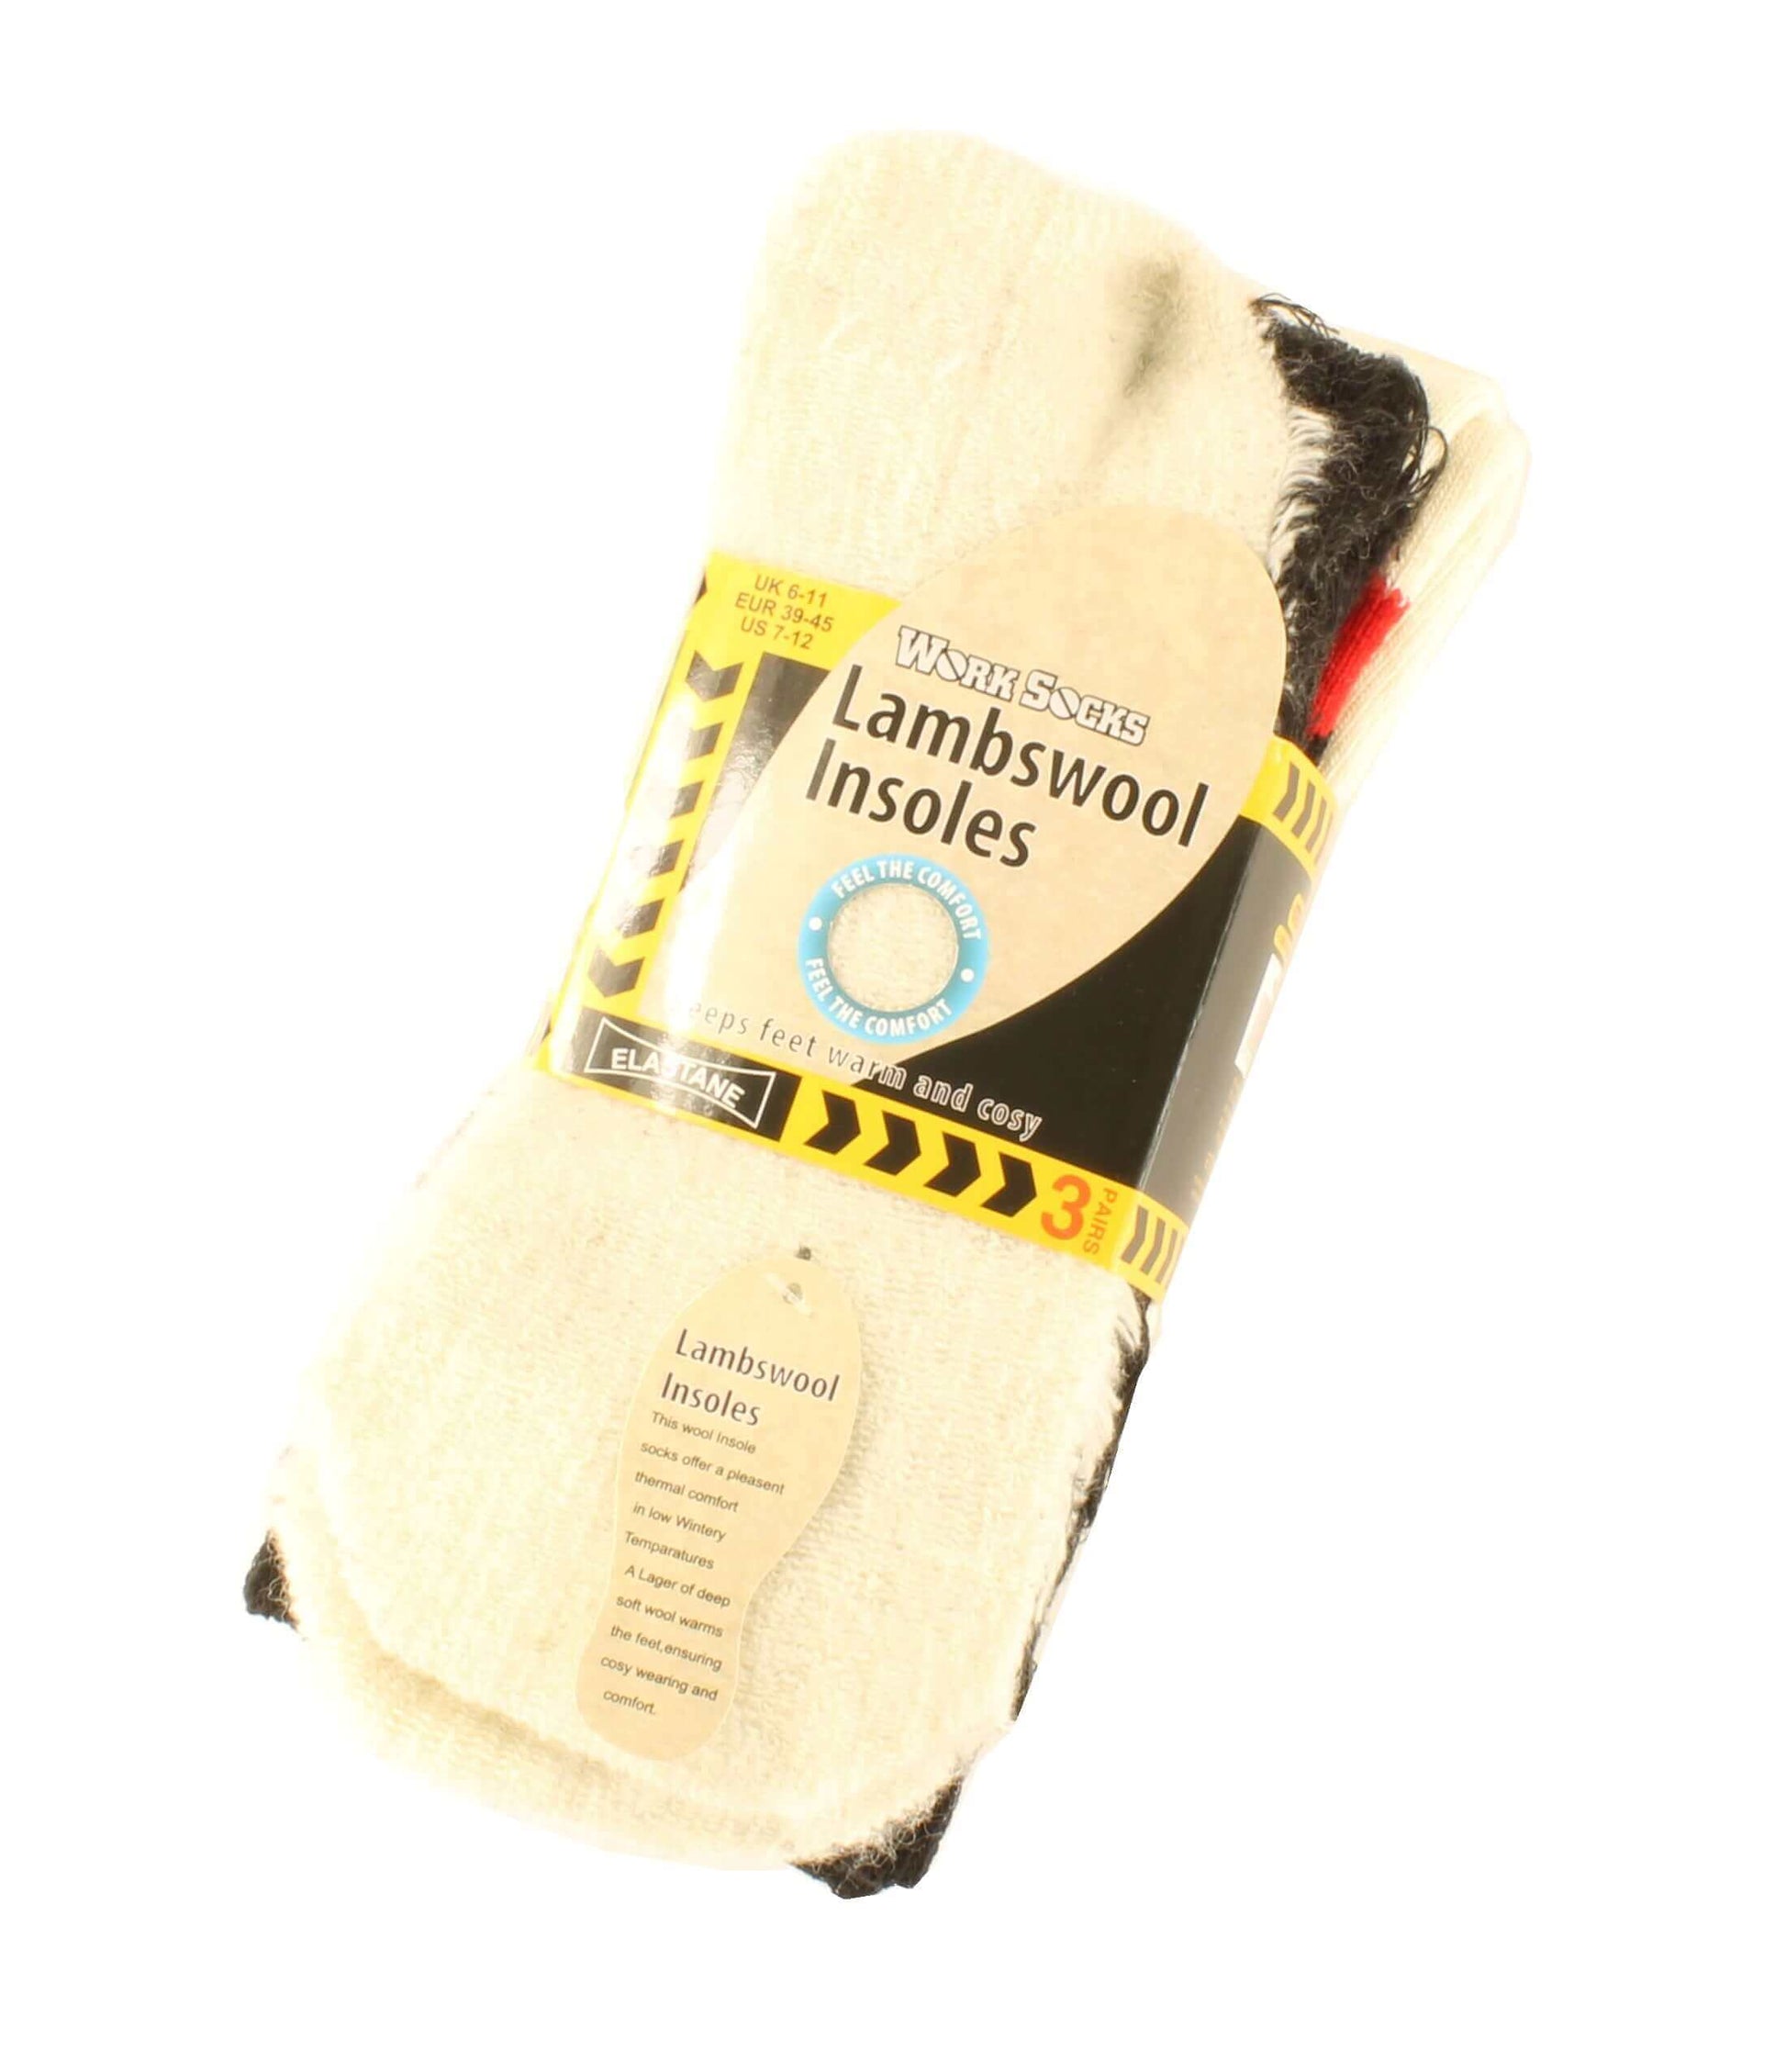 6 Pairs Of Men's Lambs Wool Sole Work Socks, Ultimate Work Boot Socks. Buy now for £10.00. A Socks by Sock Stack. 6-11, assorted, athletics, baselayer, boot, boys, comfortable, cosy, home, insoles, Lambs wool, mens, outdoor, socks, Sole Work, sports, ther